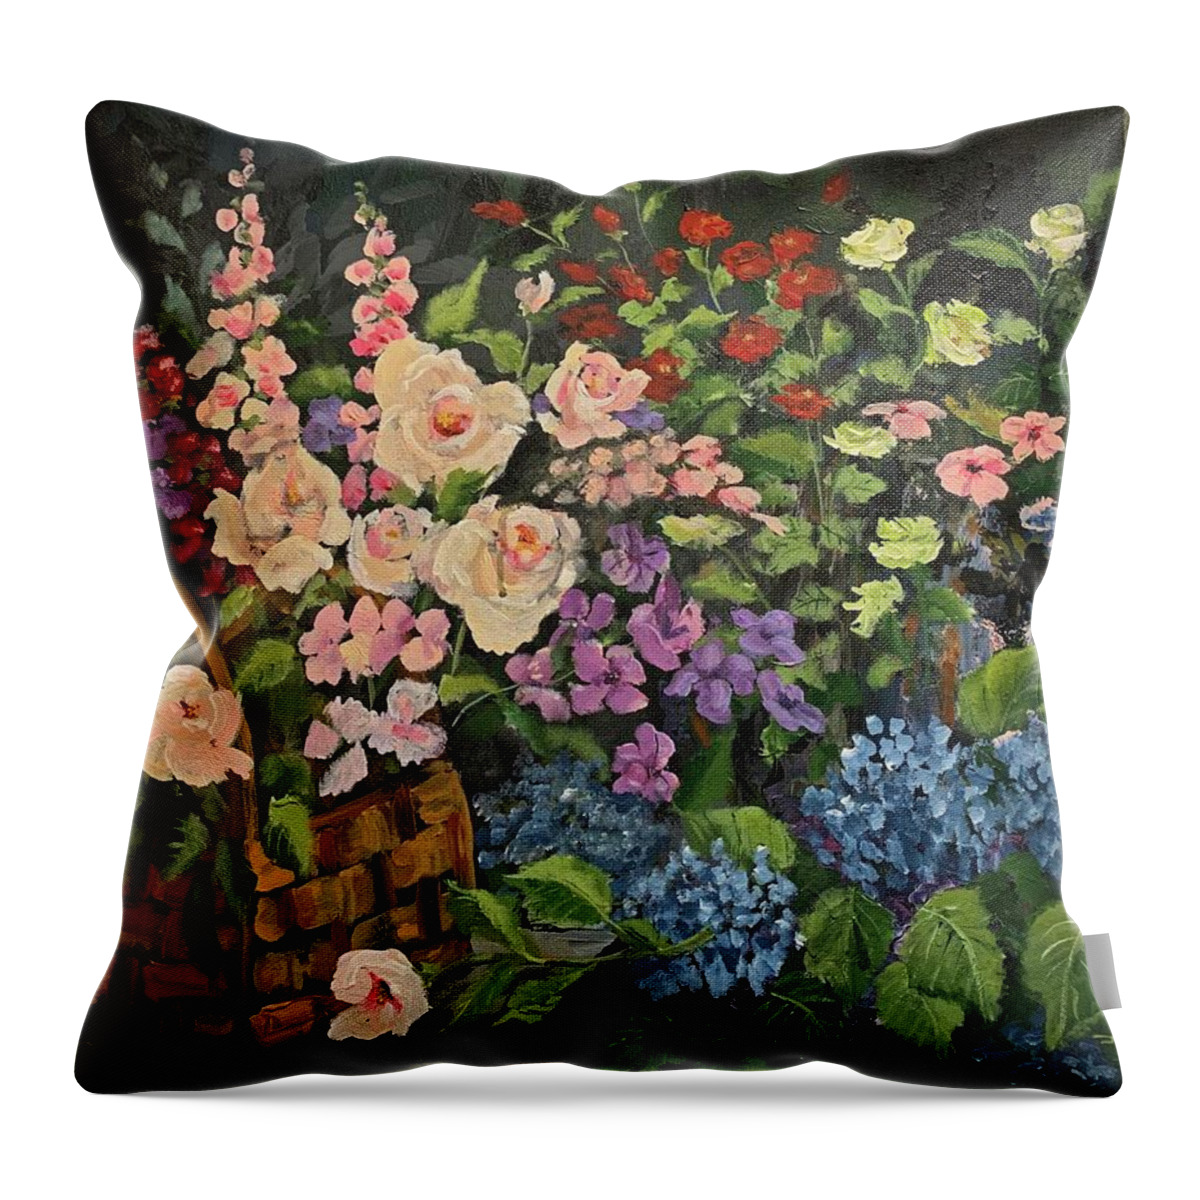 Flowers Throw Pillow featuring the painting Garden Favorites by Alan Lakin